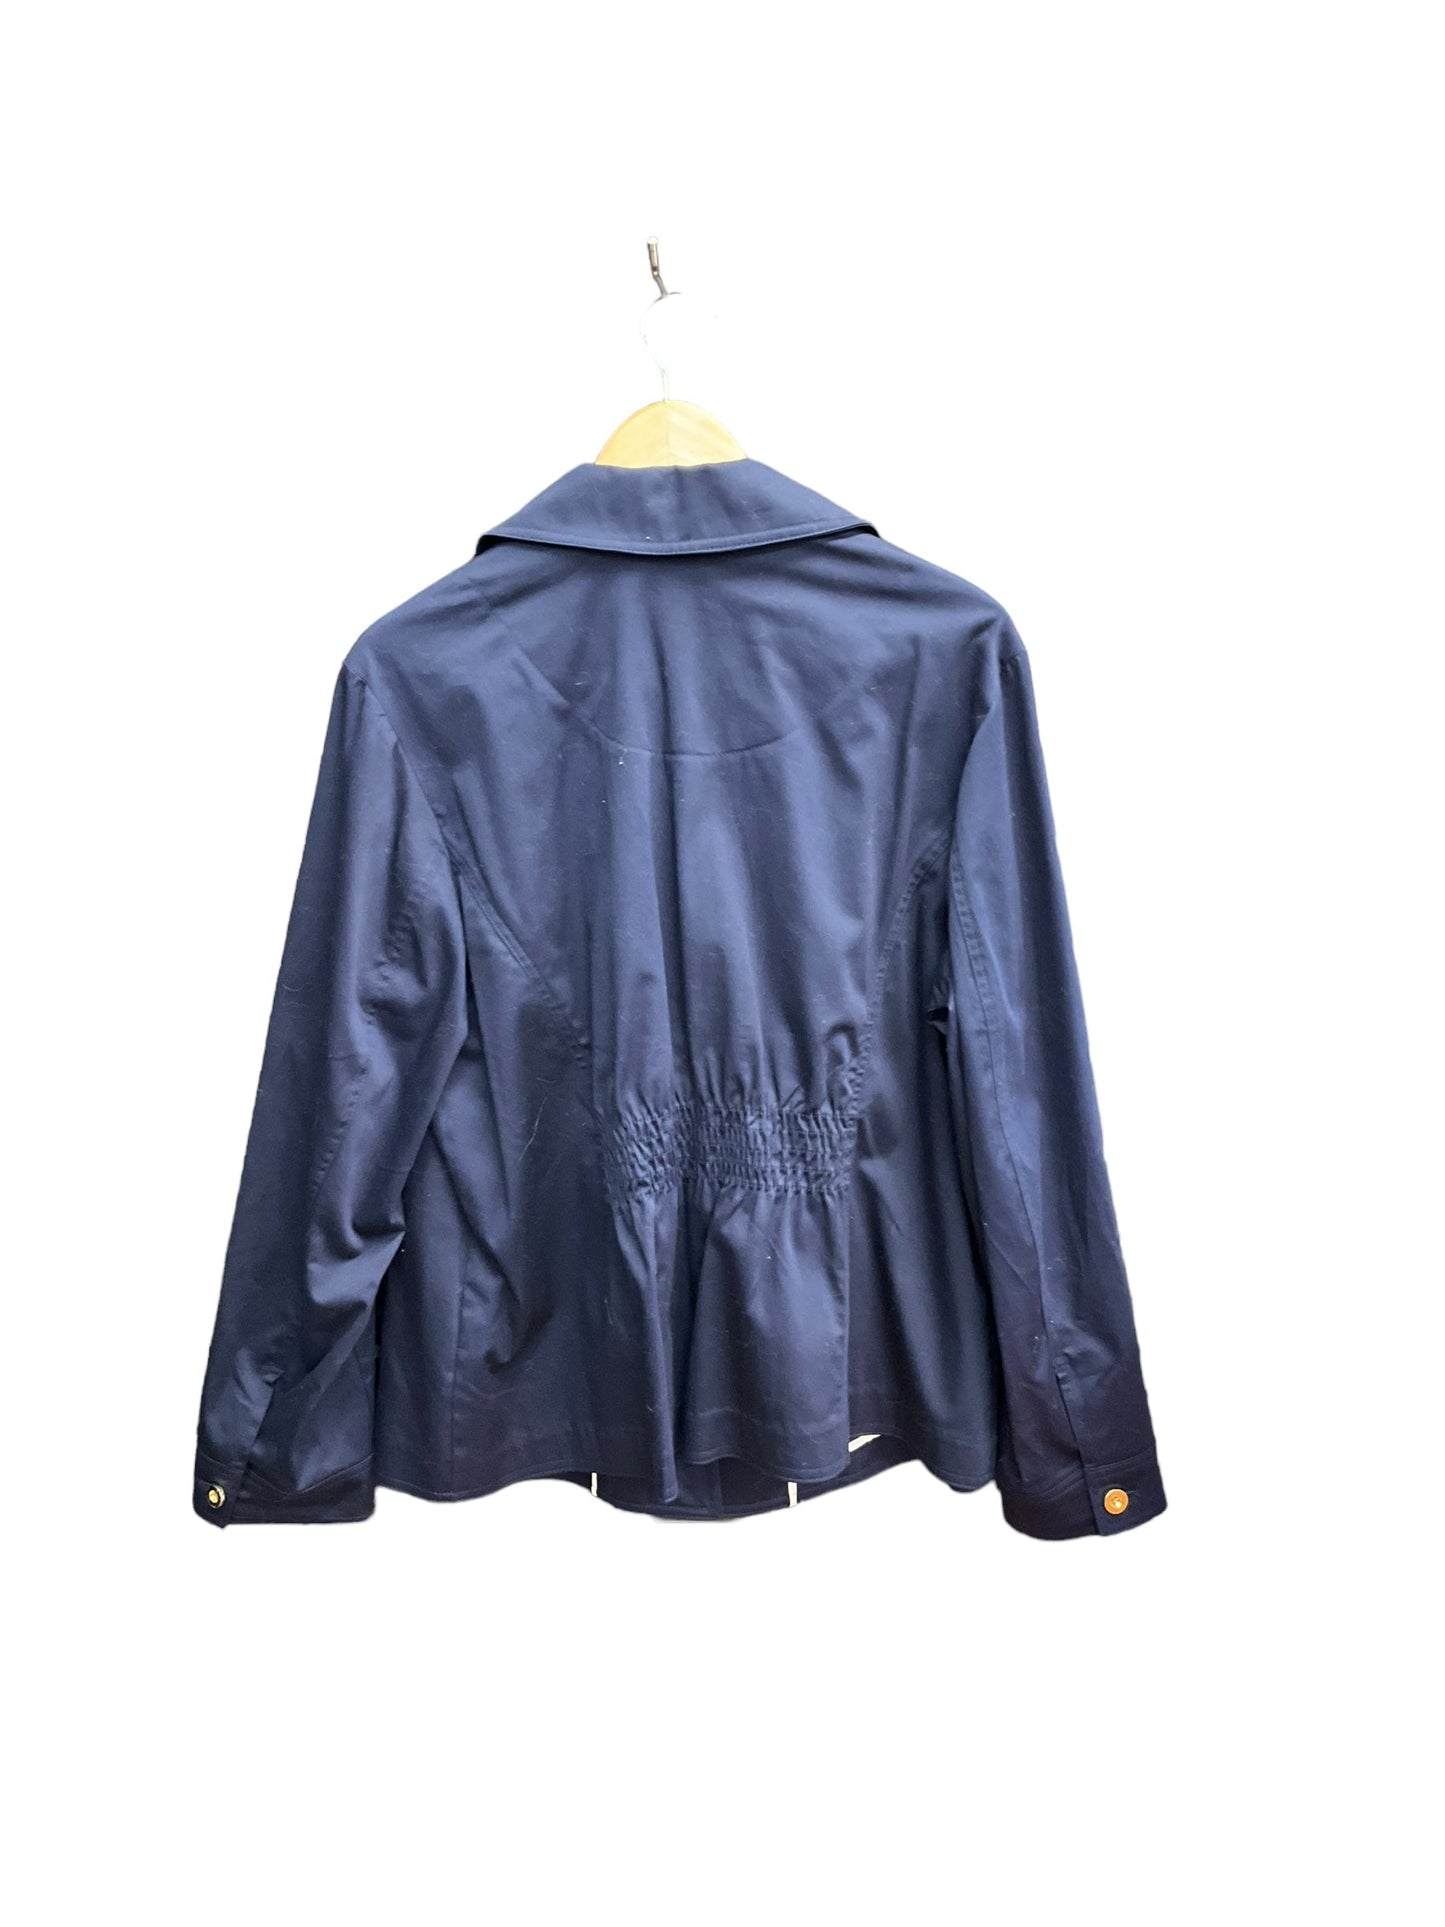 Navy Jacket Other Charter Club, Size 2x